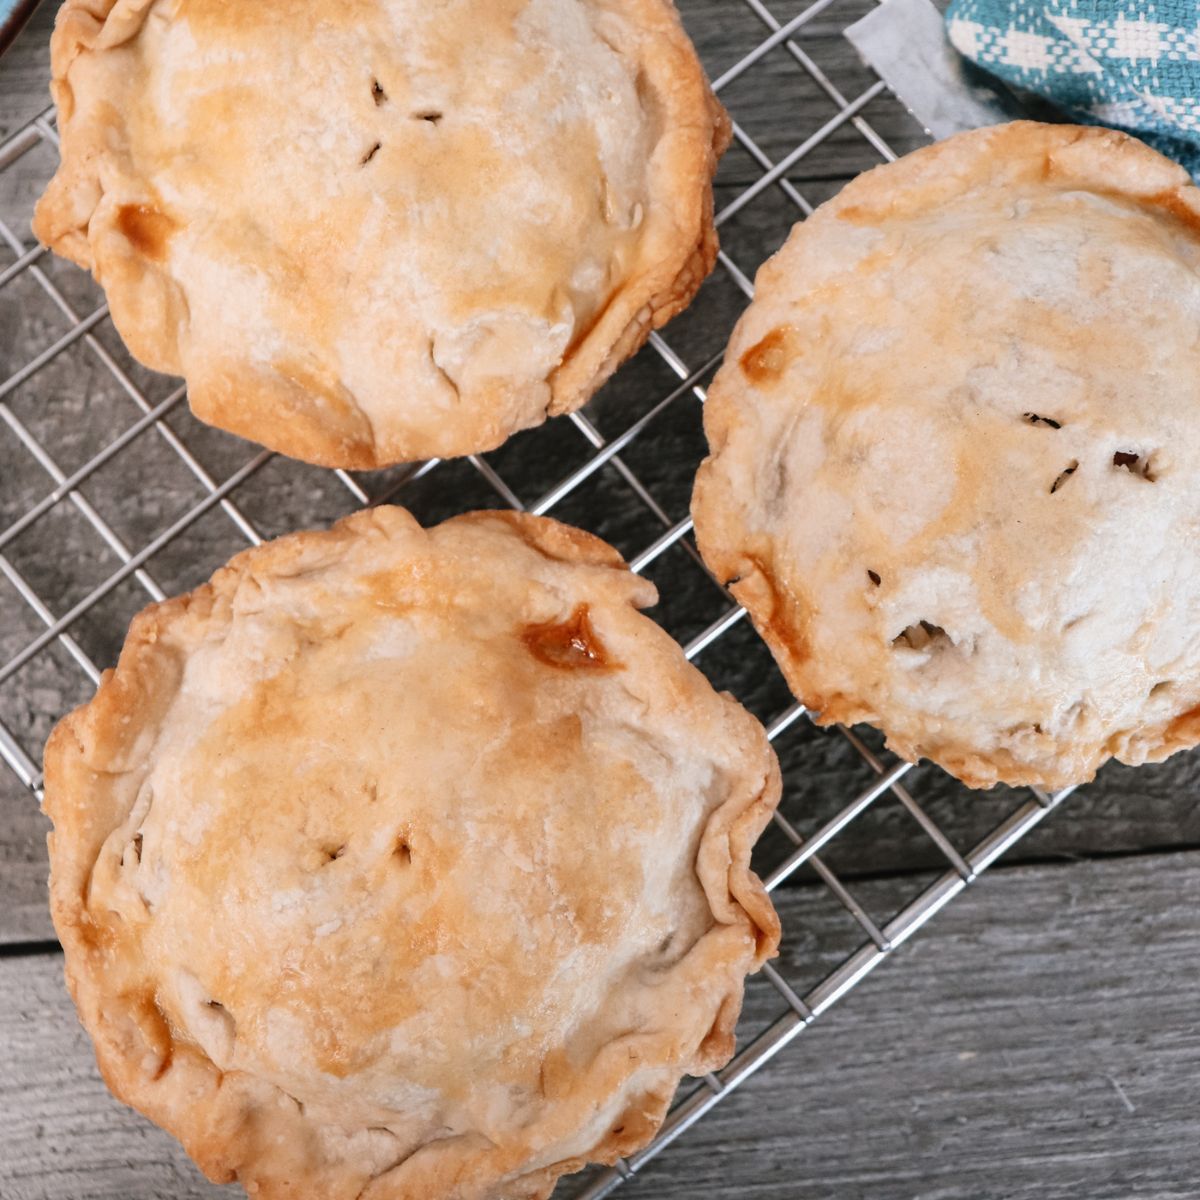 Three apple pies on a cooling rack.